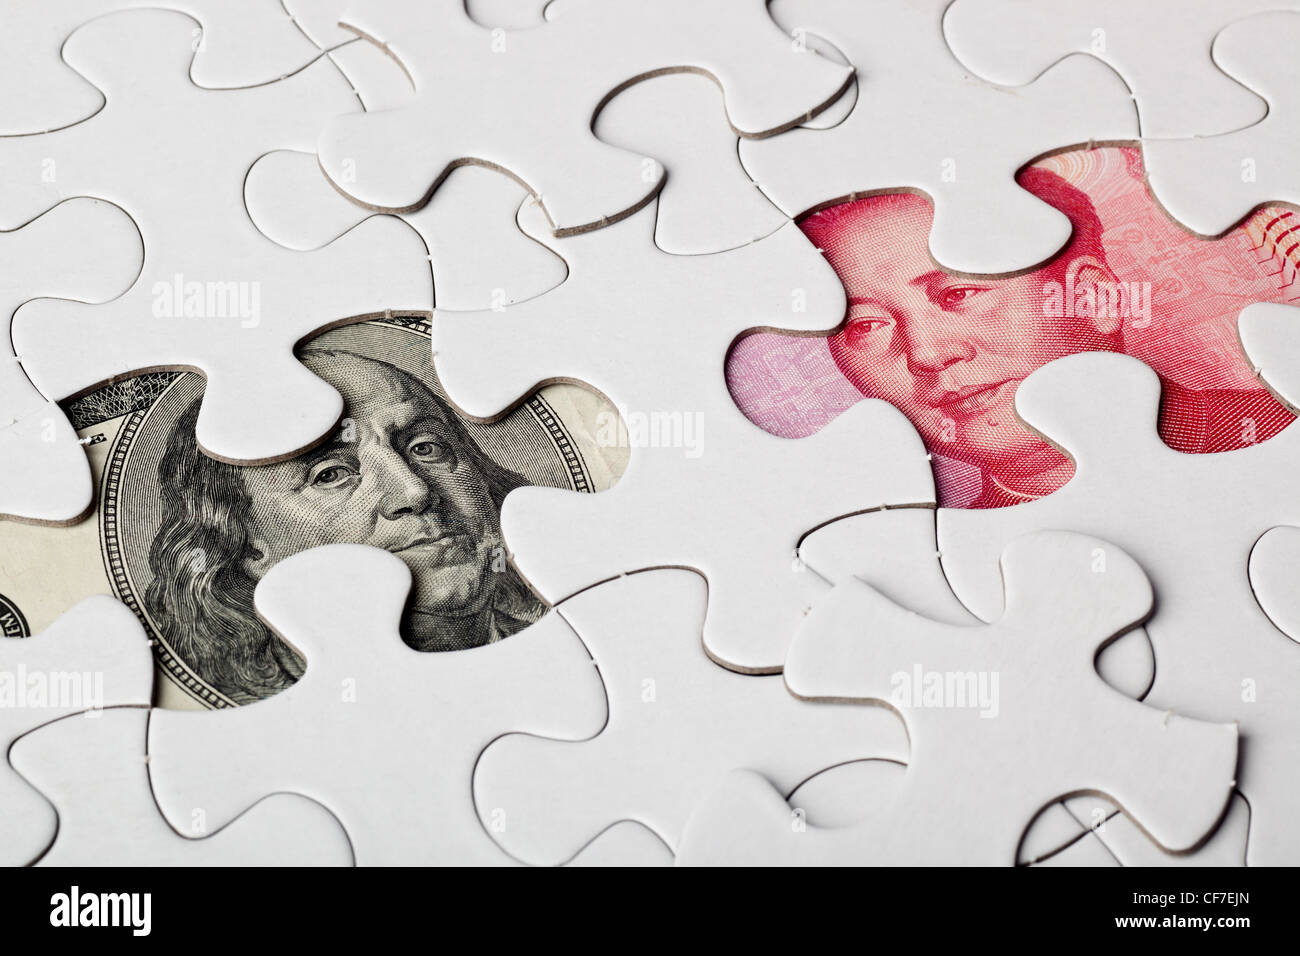 US and Chinese currencies as part of a jigsaw puzzle Stock Photo